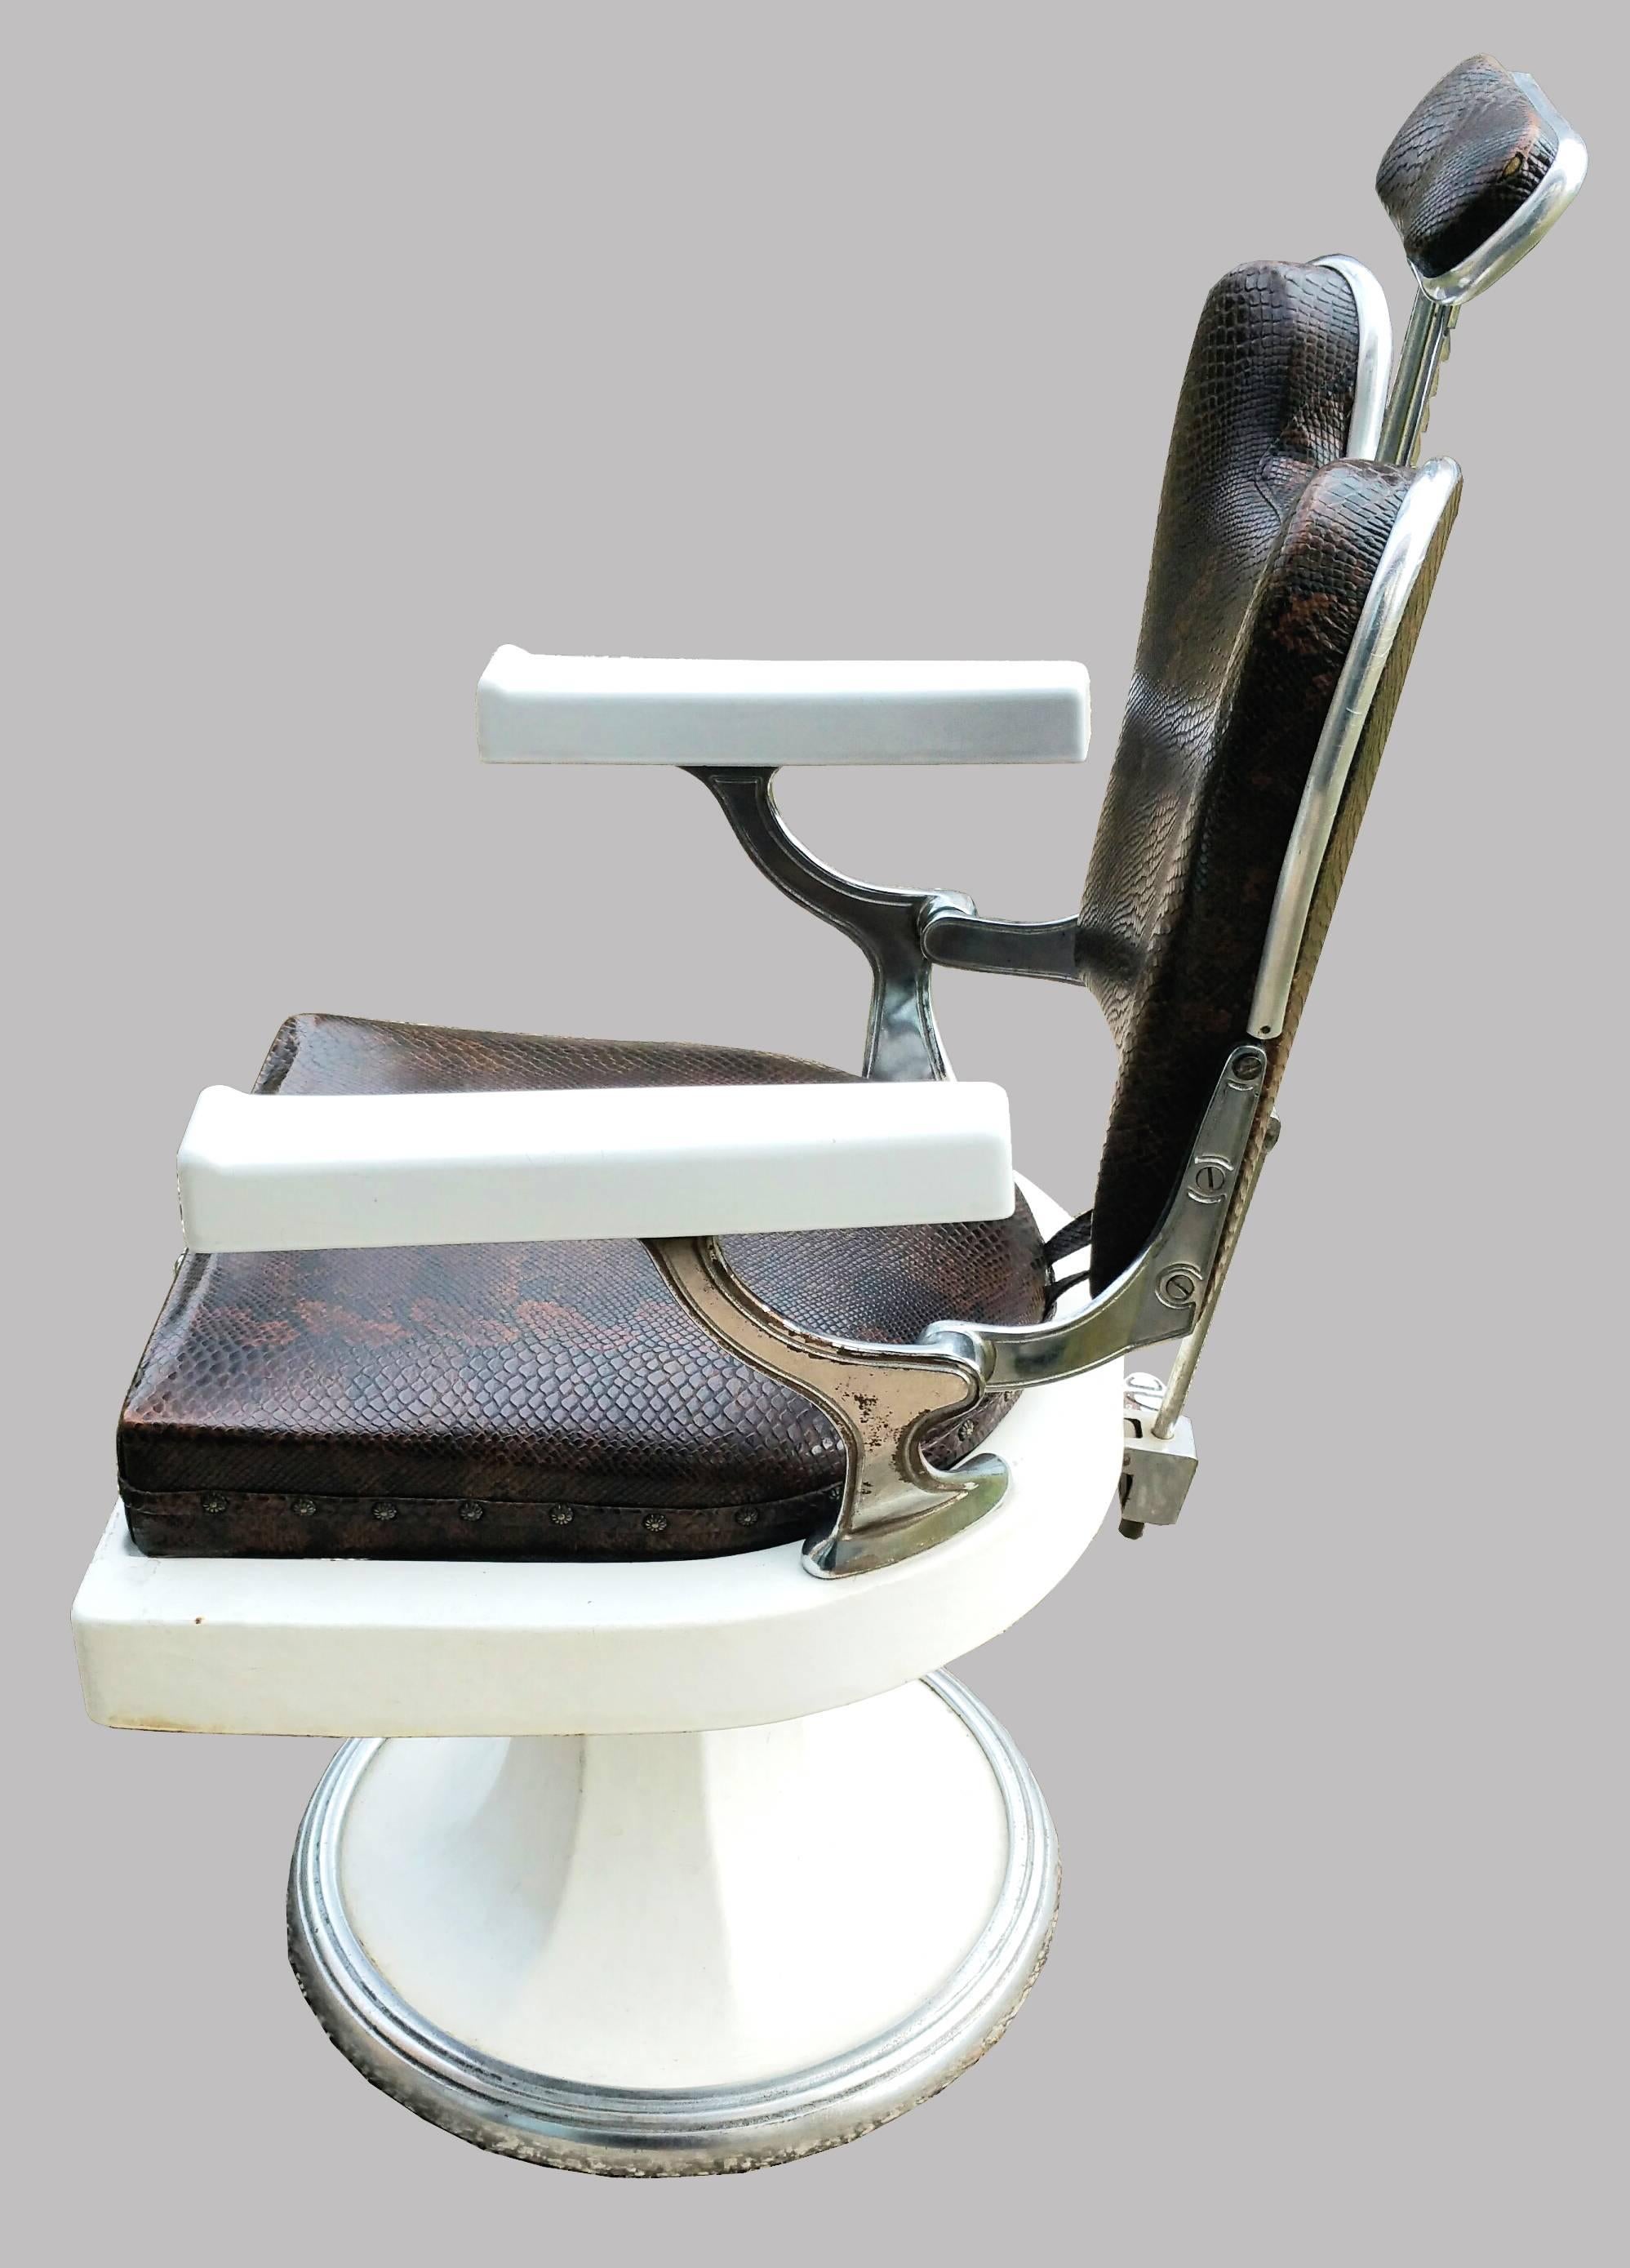 Great French vintage barber chairs - with its original and amazing brown color crocodile leather with iron cast and base in white and re-polished enamel chrome.

Chair has adjustable head rests. 

We have three chairs available. It can be sold